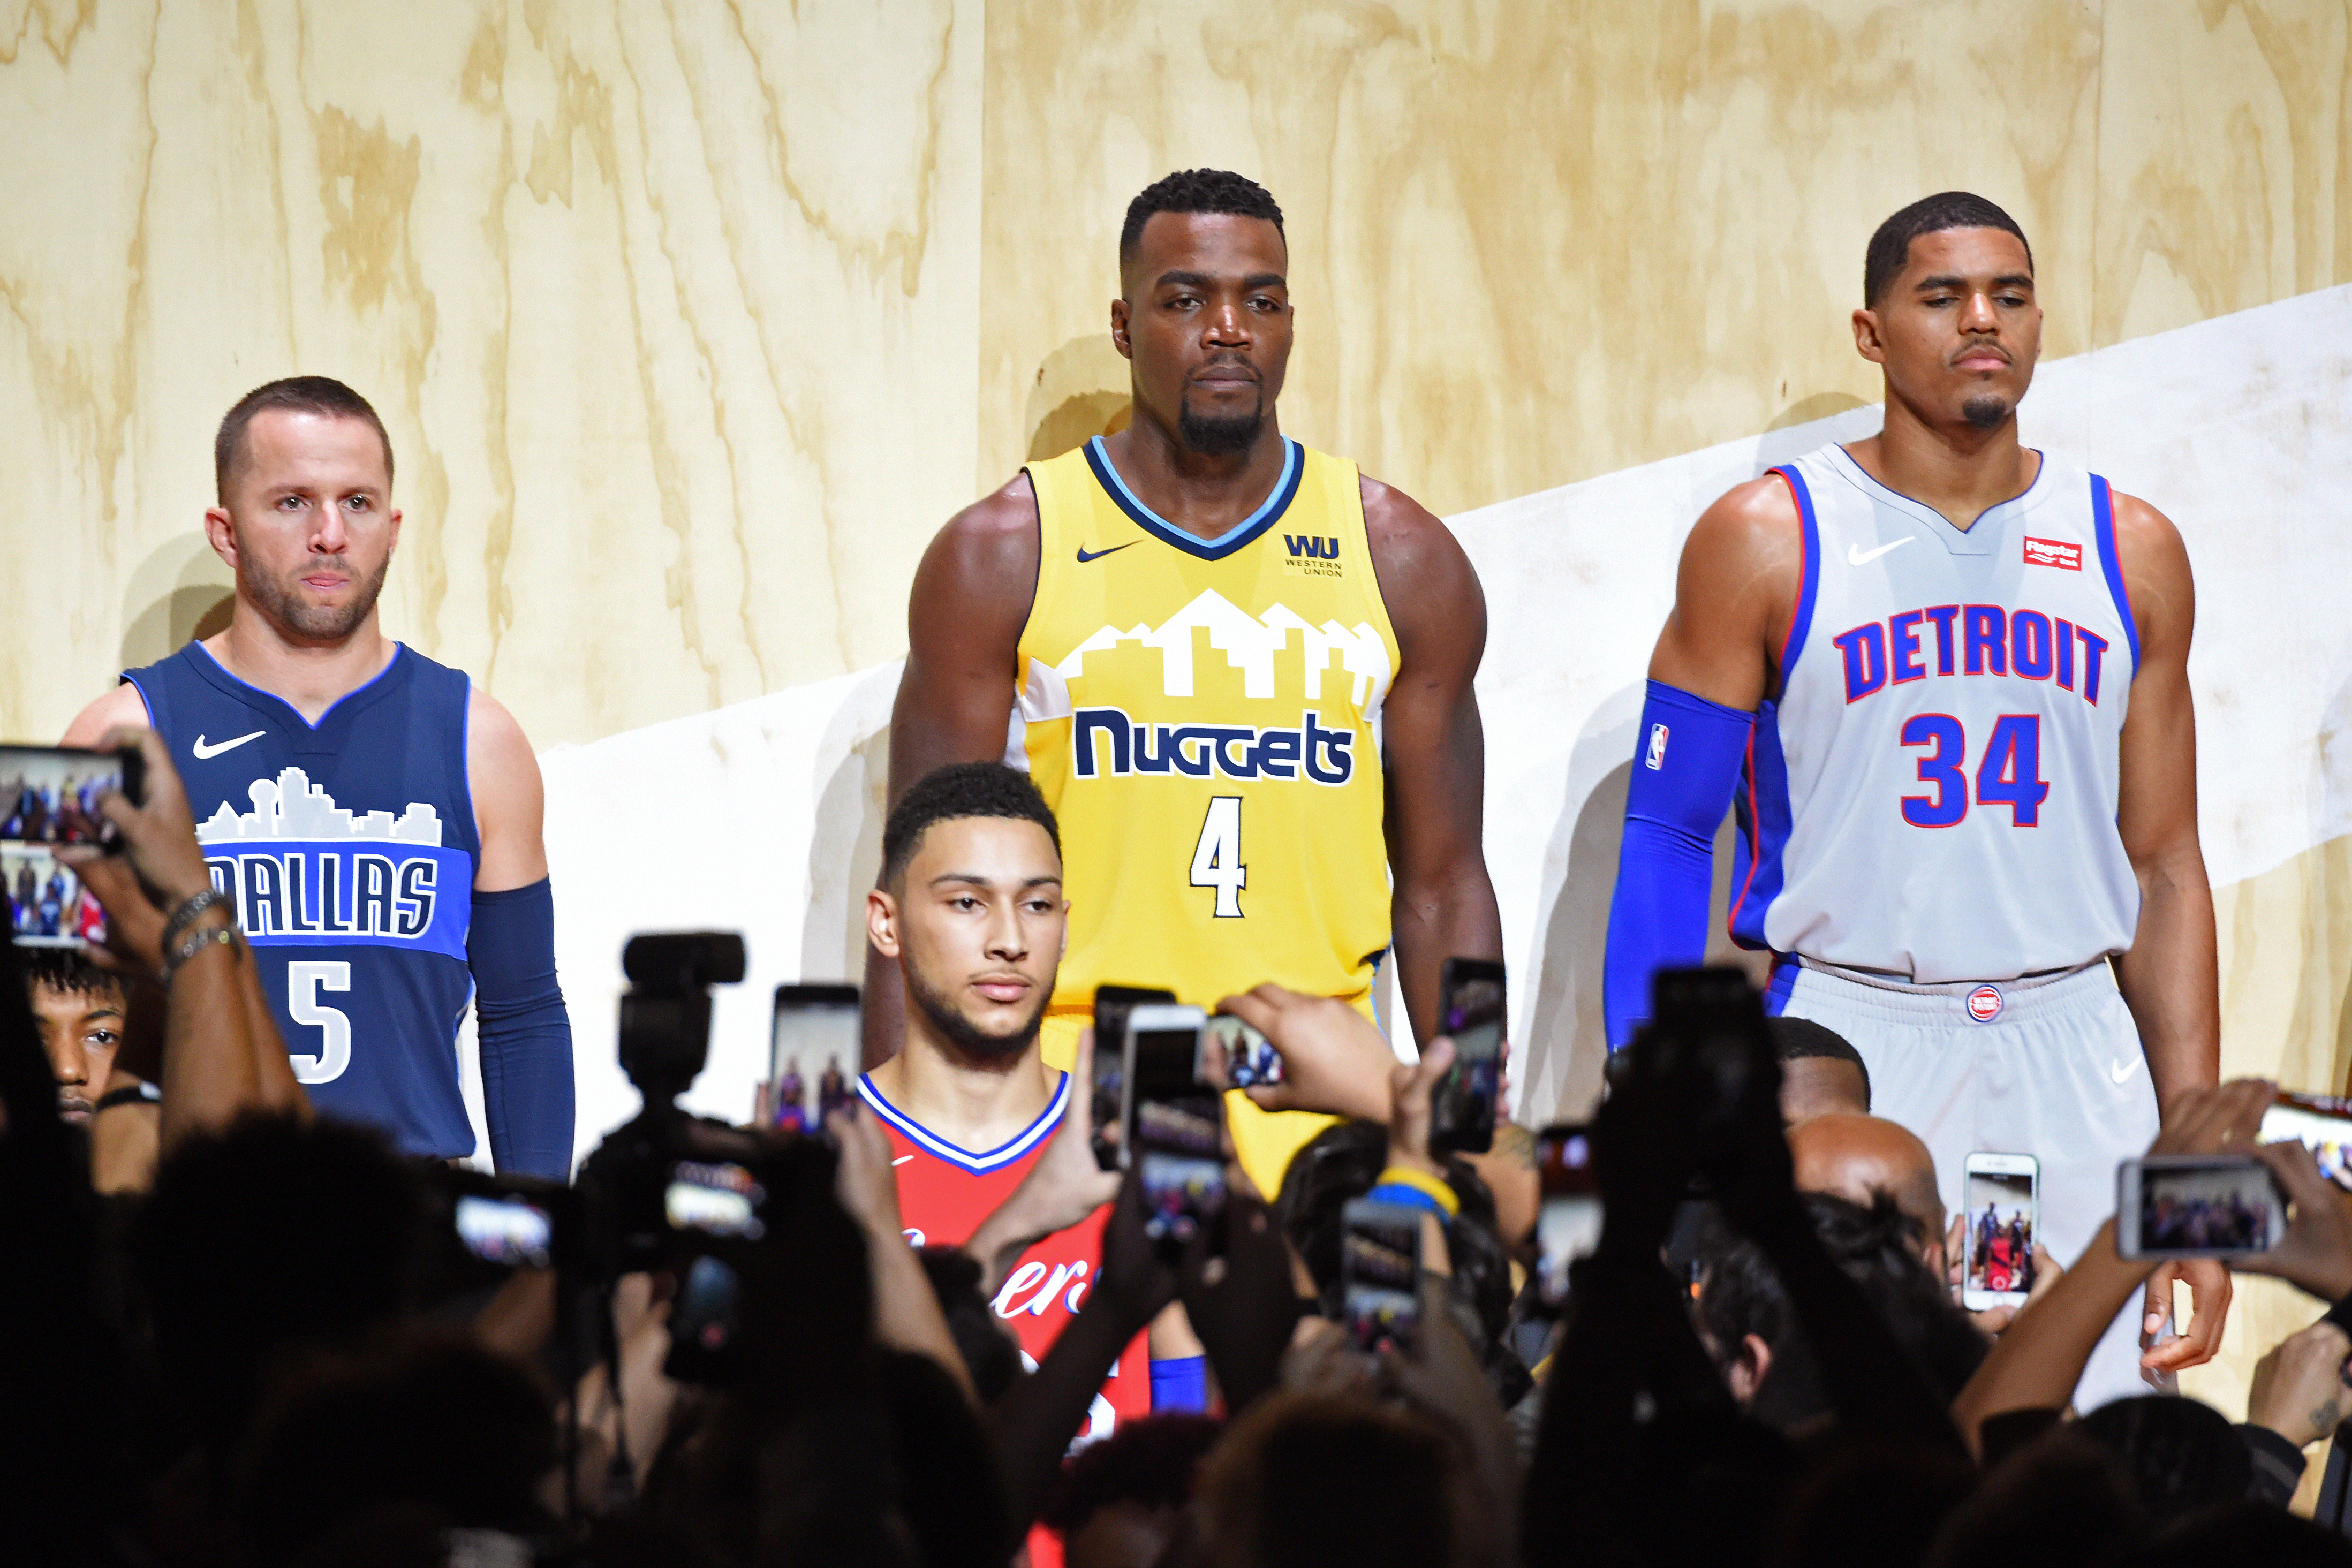 The Most-Popular NBA Team Merchandise And Player Jerseys Of 2017